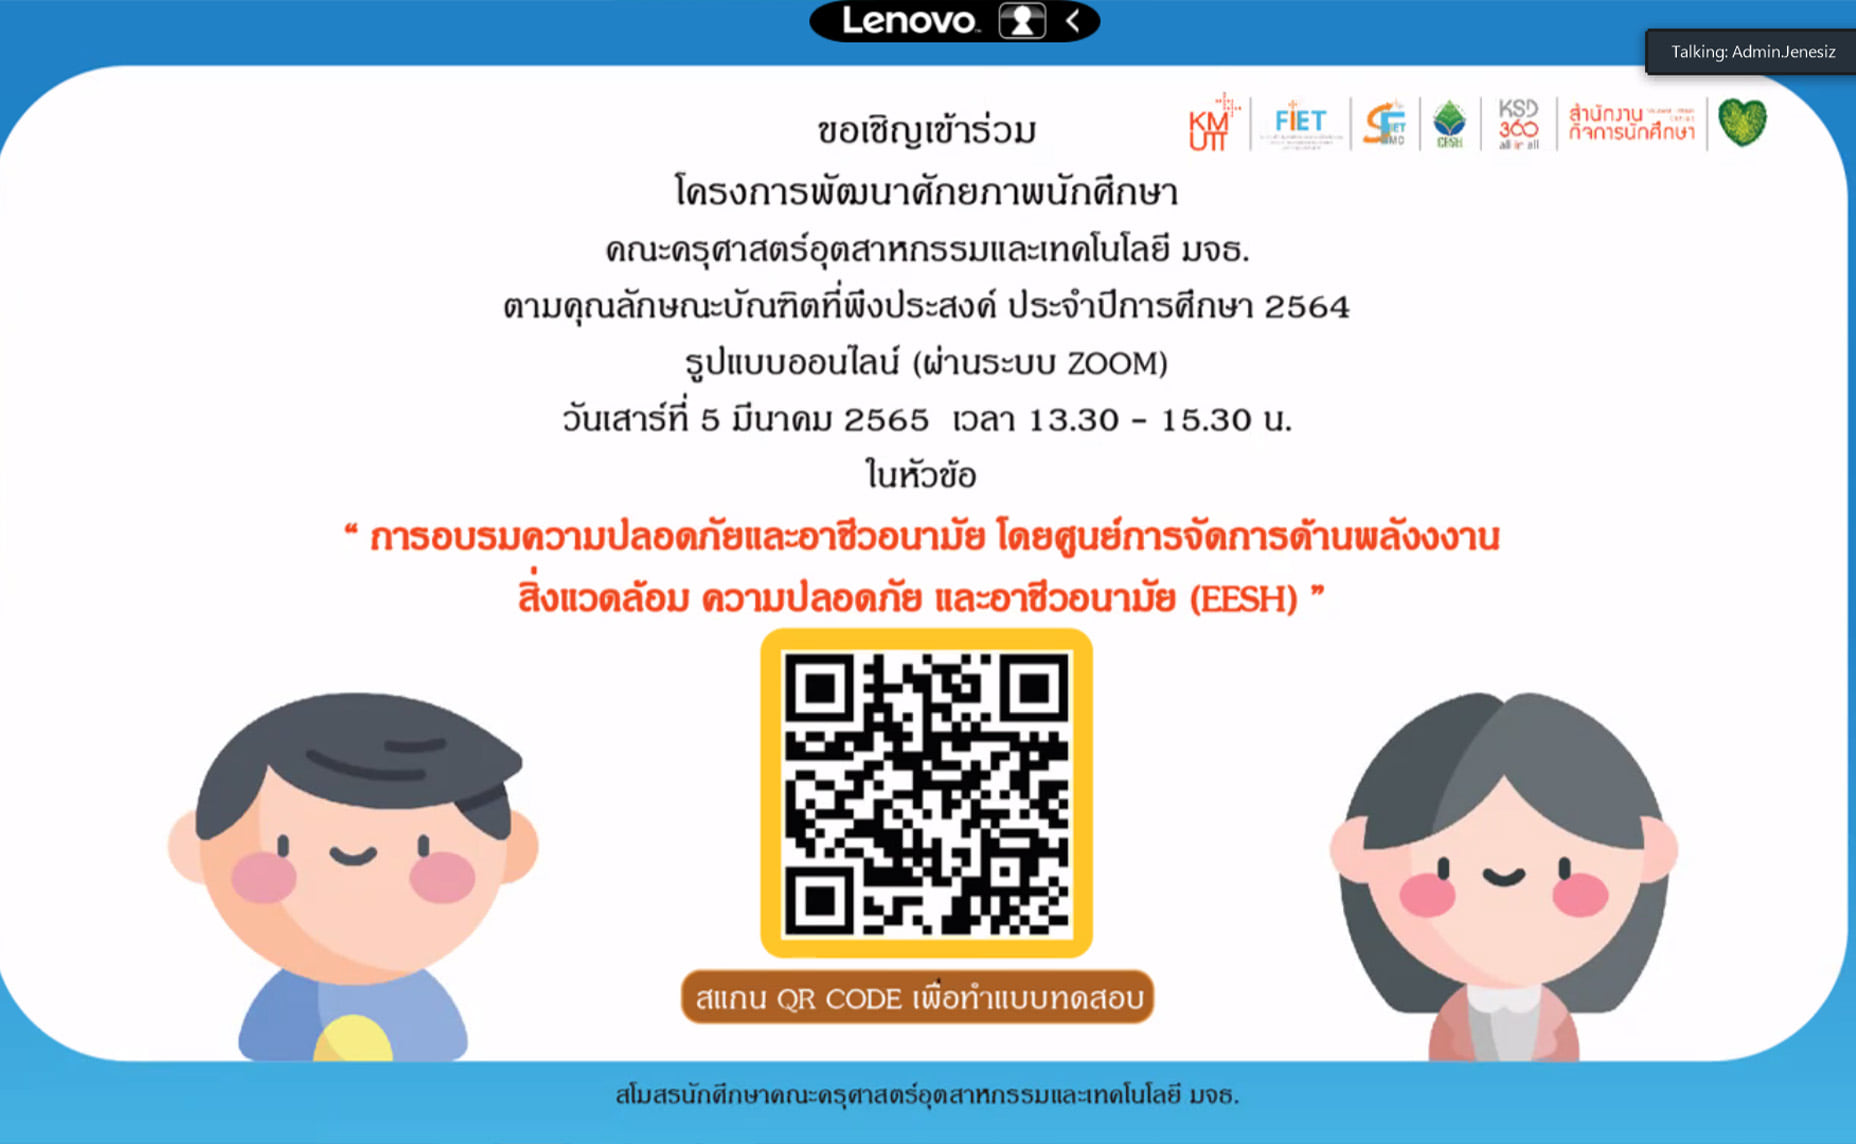 Student Club, Faculty of Industrial Education and Technology, KMUTT Student Empowerment Project based on Desirable Graduate Characteristics for academic year 2021 Online format (Activity 1) titled “Occupational Safety and Health Training”